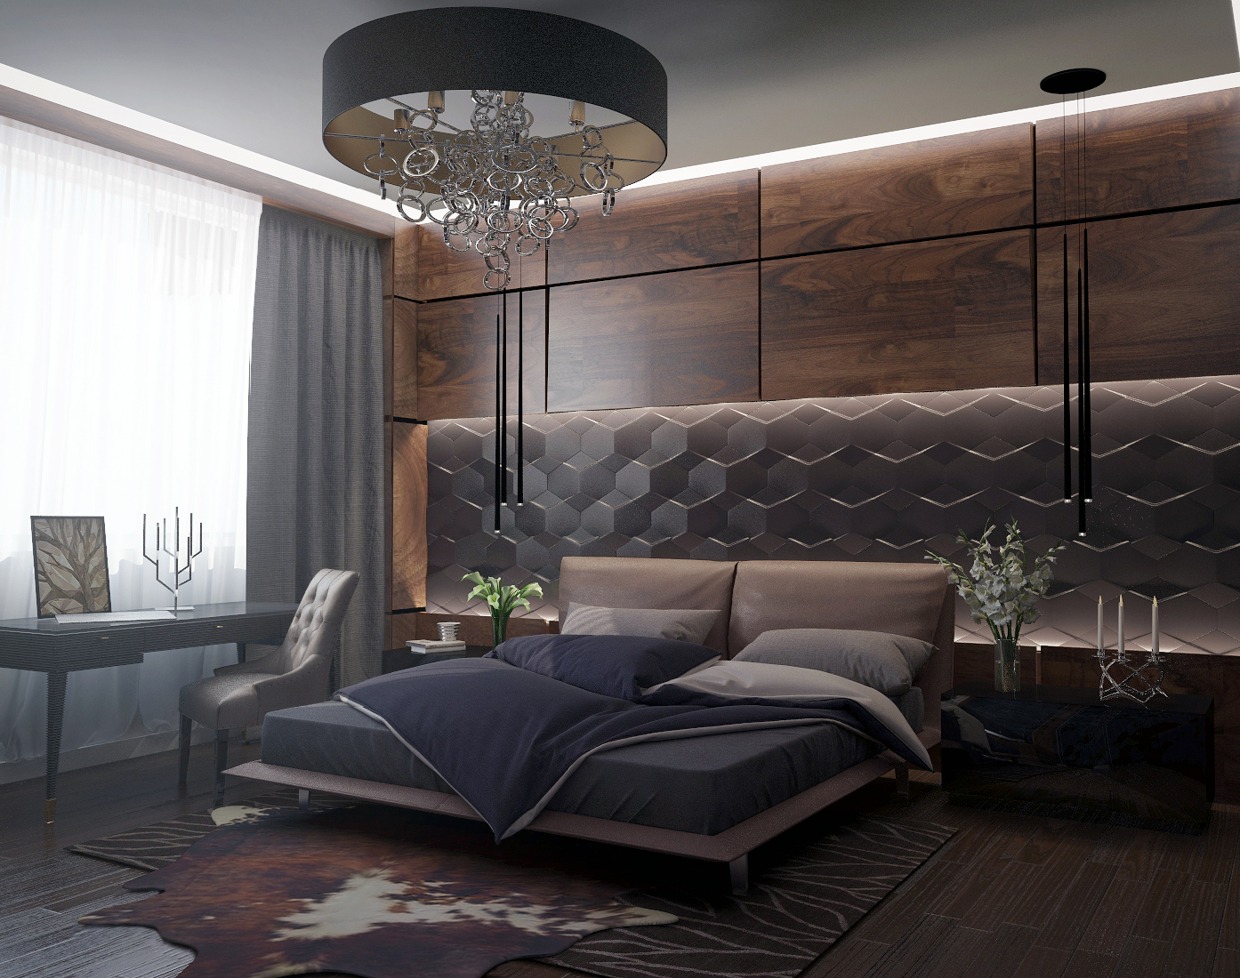 Beautiful bedroom design "width =" 1240 "height =" 978 "srcset =" https://mileray.com/wp-content/uploads/2020/05/1588507899_528_The-Best-15-Bedroom-Design-Ideas-Which-Show-Gorgeous-and.jpg 1240w, https://mileray.com/ wp -content / uploads / 2016/12 / Dimitriy-Sivak-300x237.jpg 300w, https://mileray.com/wp-content/uploads/2016/12/Dimitriy-Sivak-768x606.jpg 768w, https: // myfashionos .com / wp-content / uploads / 2016/12 / Dimitriy-Sivak-1024x808.jpg 1024w, https://mileray.com/wp-content/uploads/2016/12/Dimitriy-Sivak-696x549.jpg 696w, https : //mileray.com/wp-content/uploads/2016/12/Dimitriy-Sivak-1068x842.jpg 1068w, https://mileray.com/wp-content/uploads/2016/12/Dimitriy-Sivak-533x420. jpg 533w "sizes =" (maximum width: 1240px) 100vw, 1240px